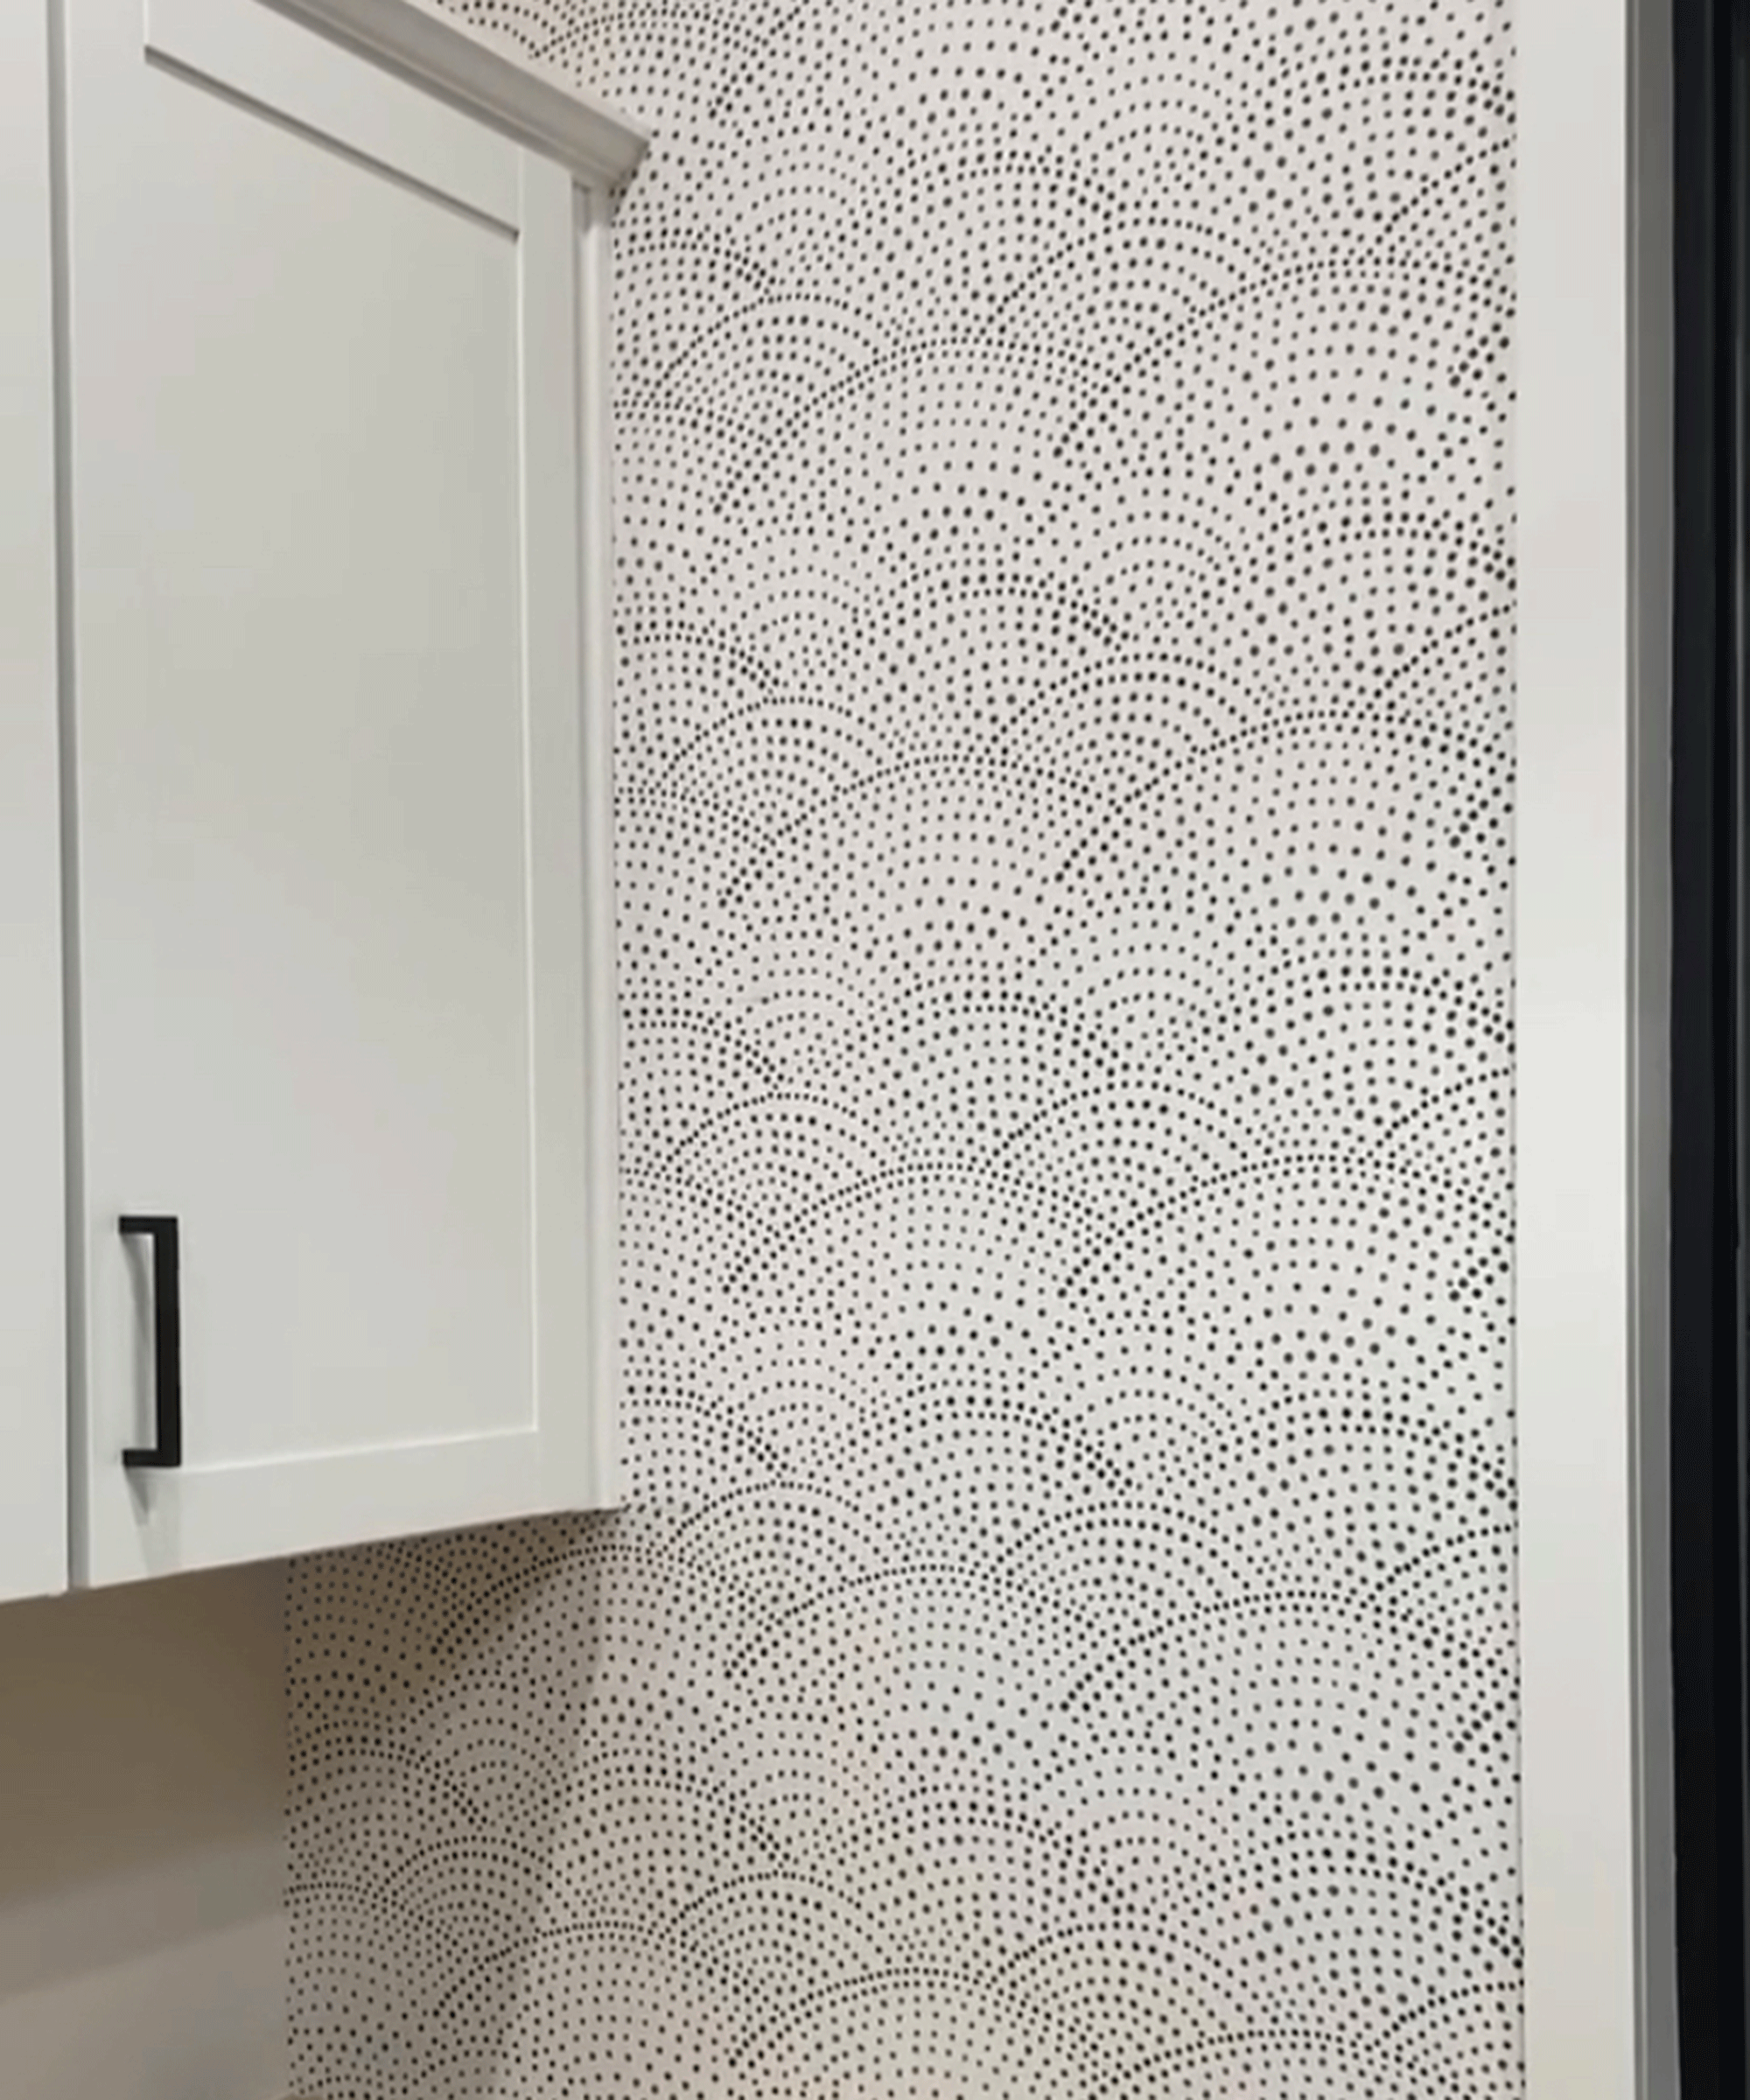 A close-up shot of white kitchen cupboards with handles, and monochrome spotted white and black wallpaper decor